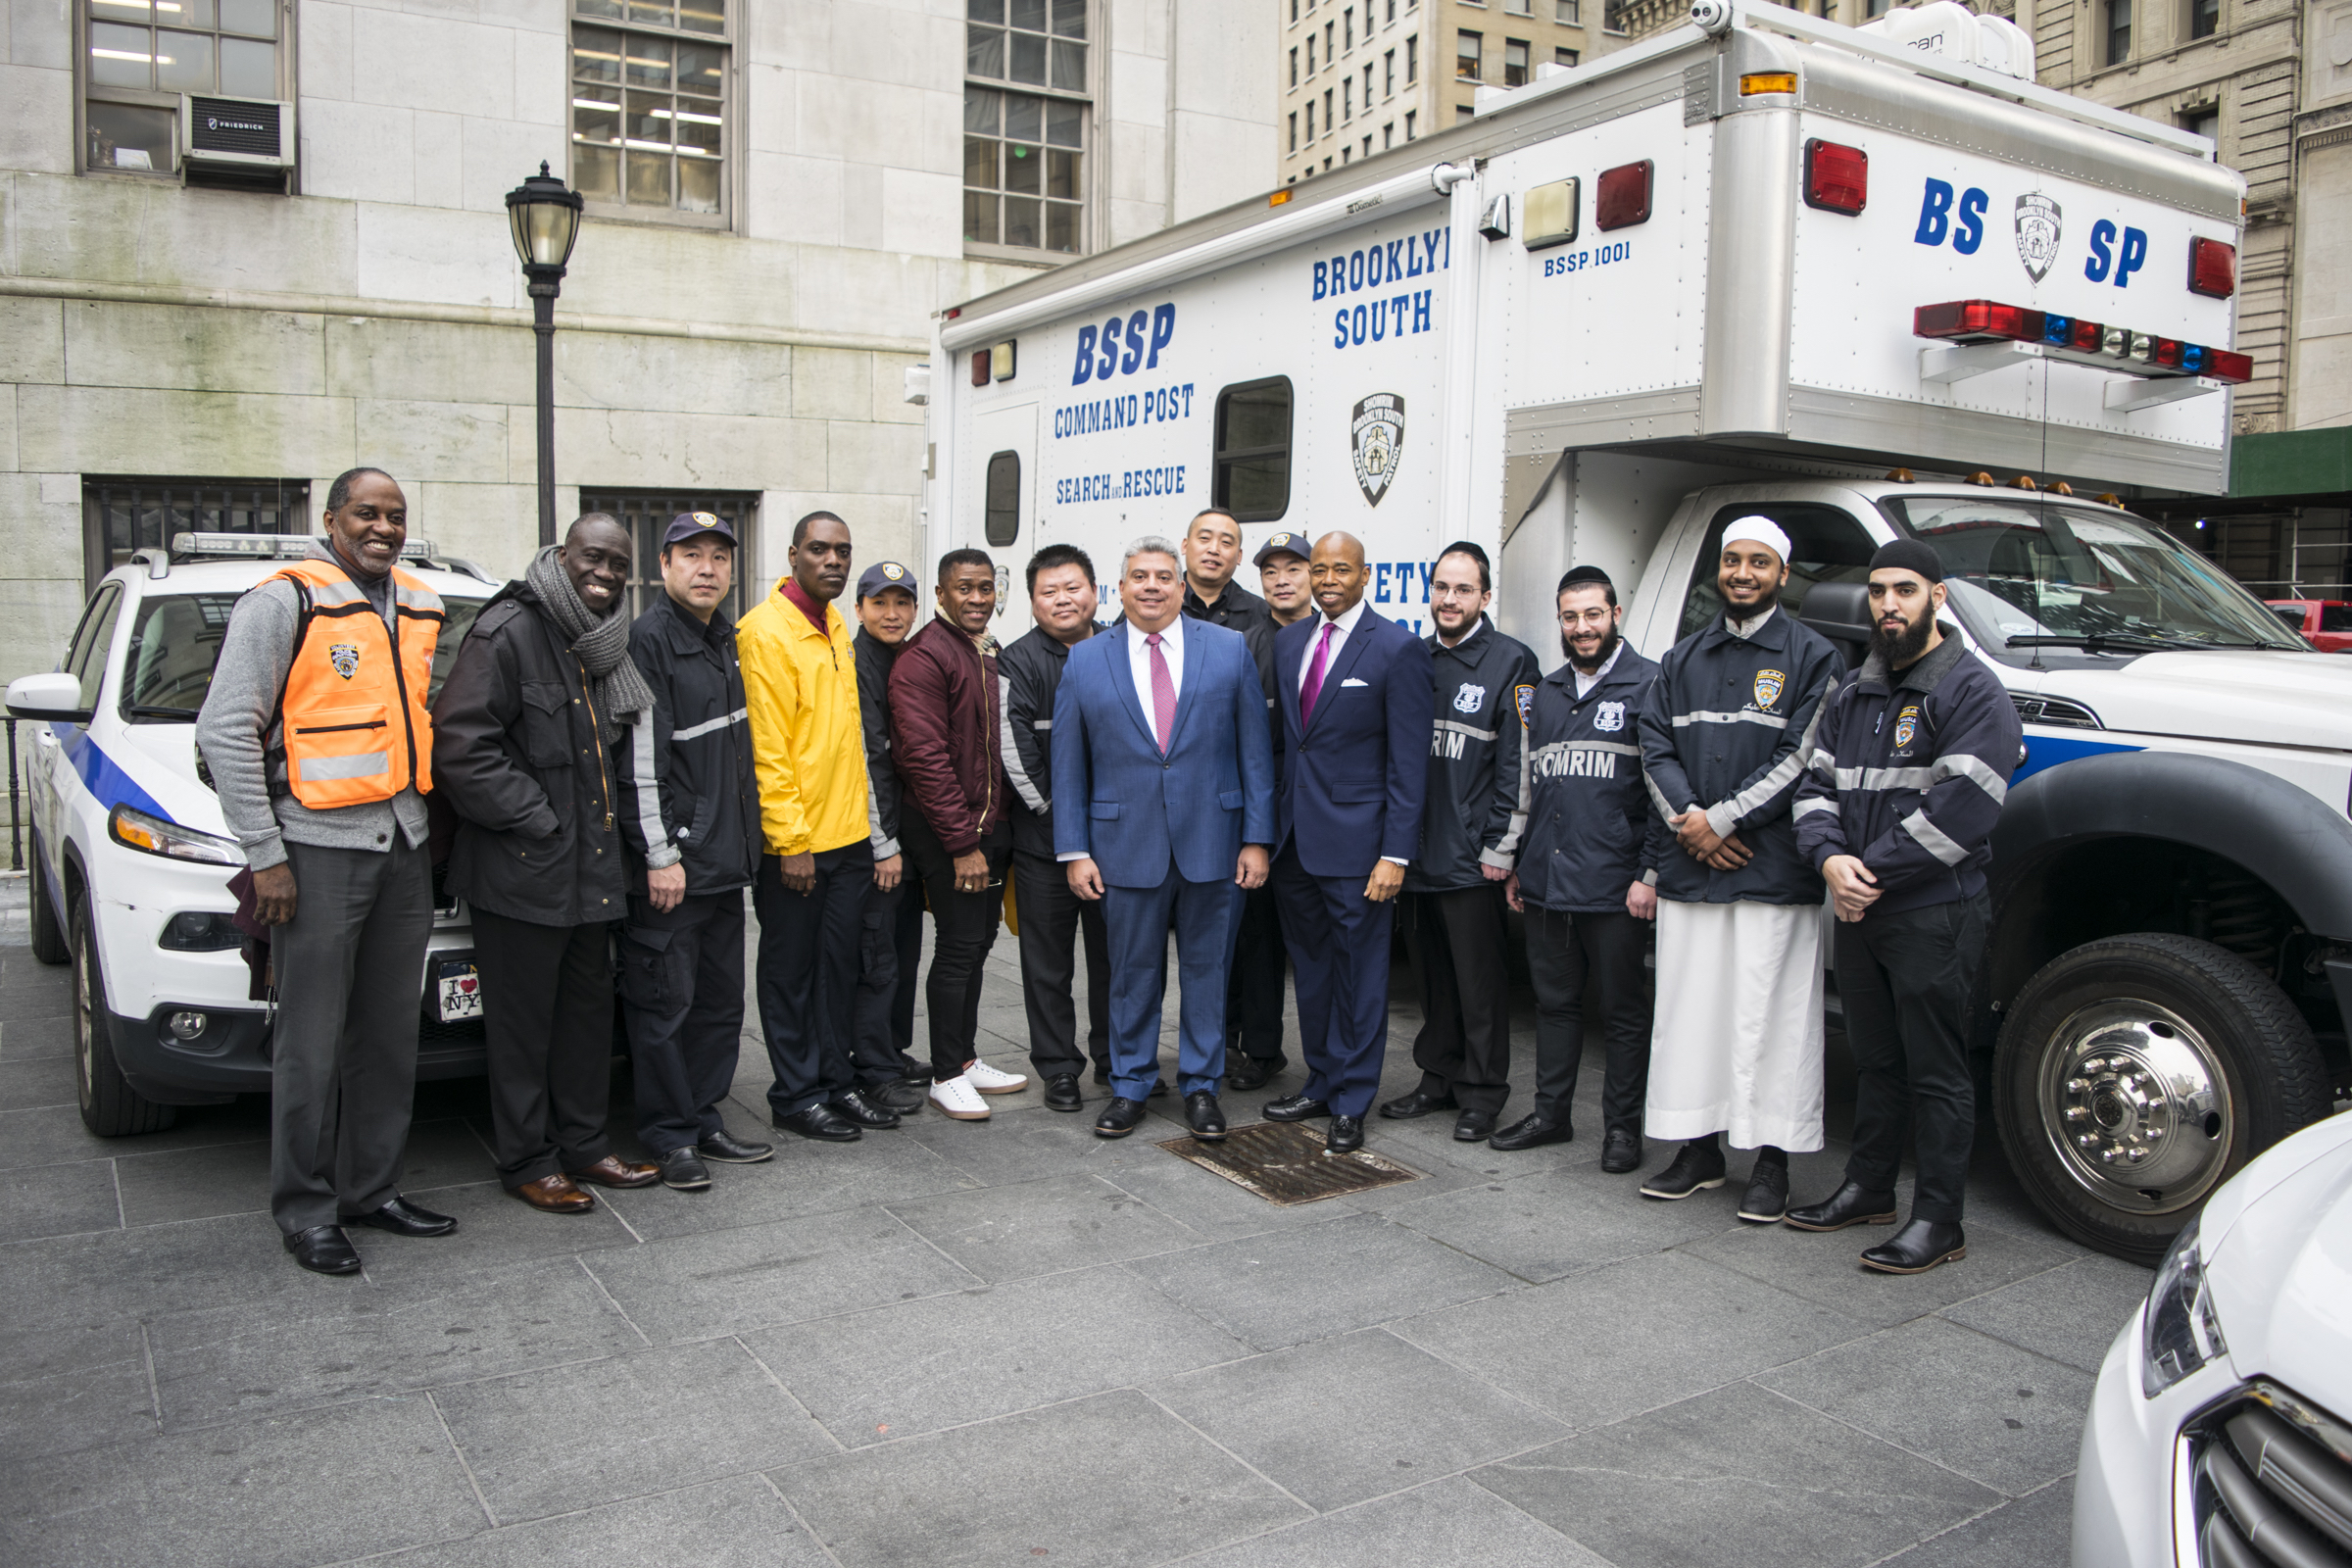 Eric Gonzalez and Eric Adams pose with some of the law enforcement officers and community organizers whom they have credited with helping to set a record-low number of homicides in Brooklyn last year. Eagle photo by Rob Abruzzese